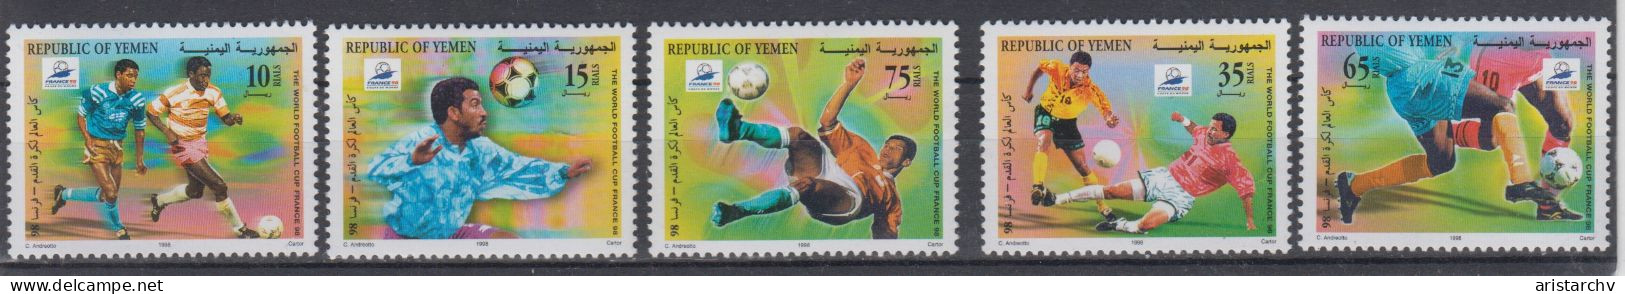 YEMEN 1998 FOOTBALL WORLD CUP SHEETLET AND 5 STAMPS - 1998 – France